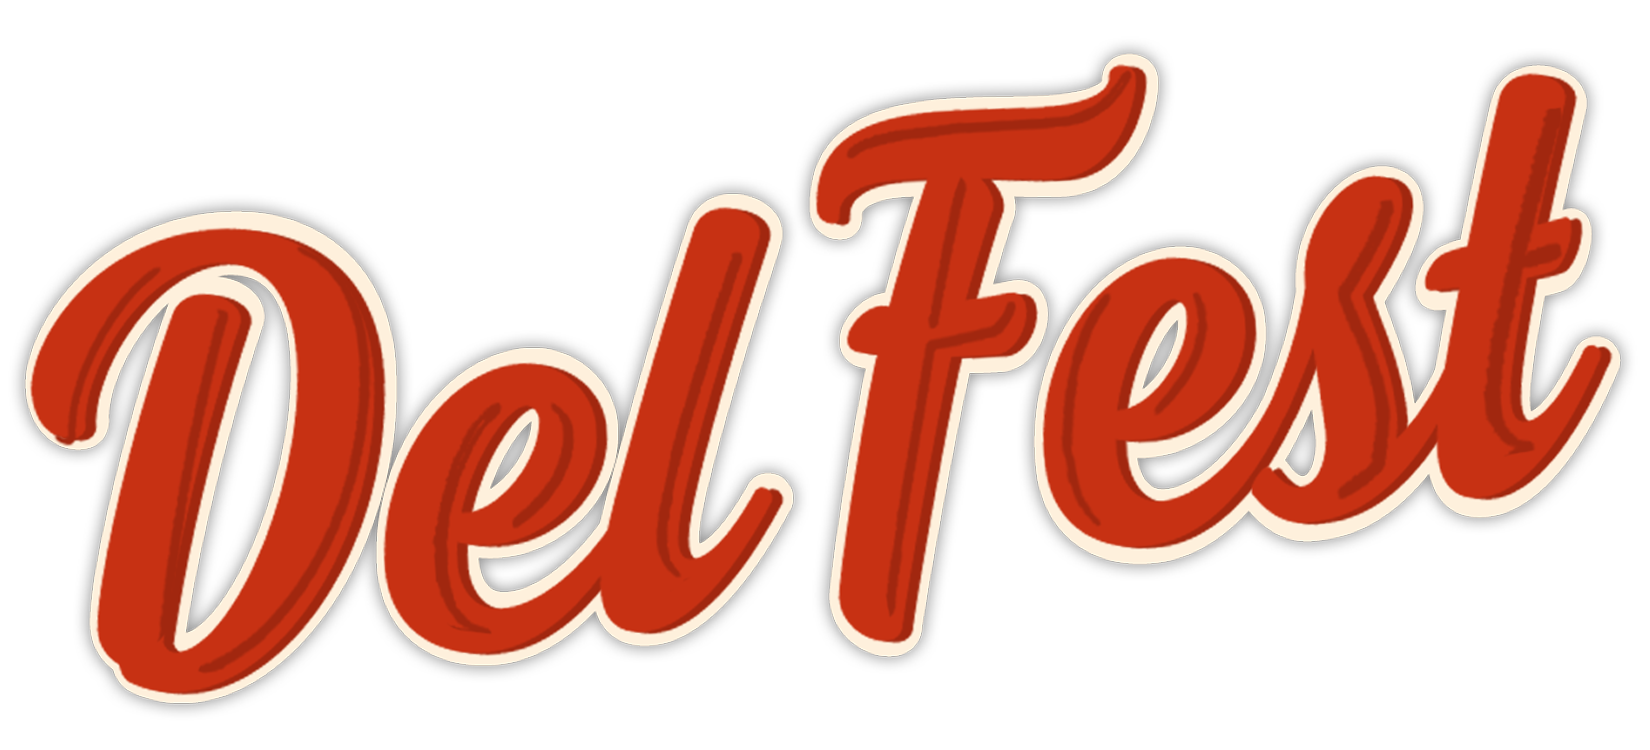 delfest logo only (1).png